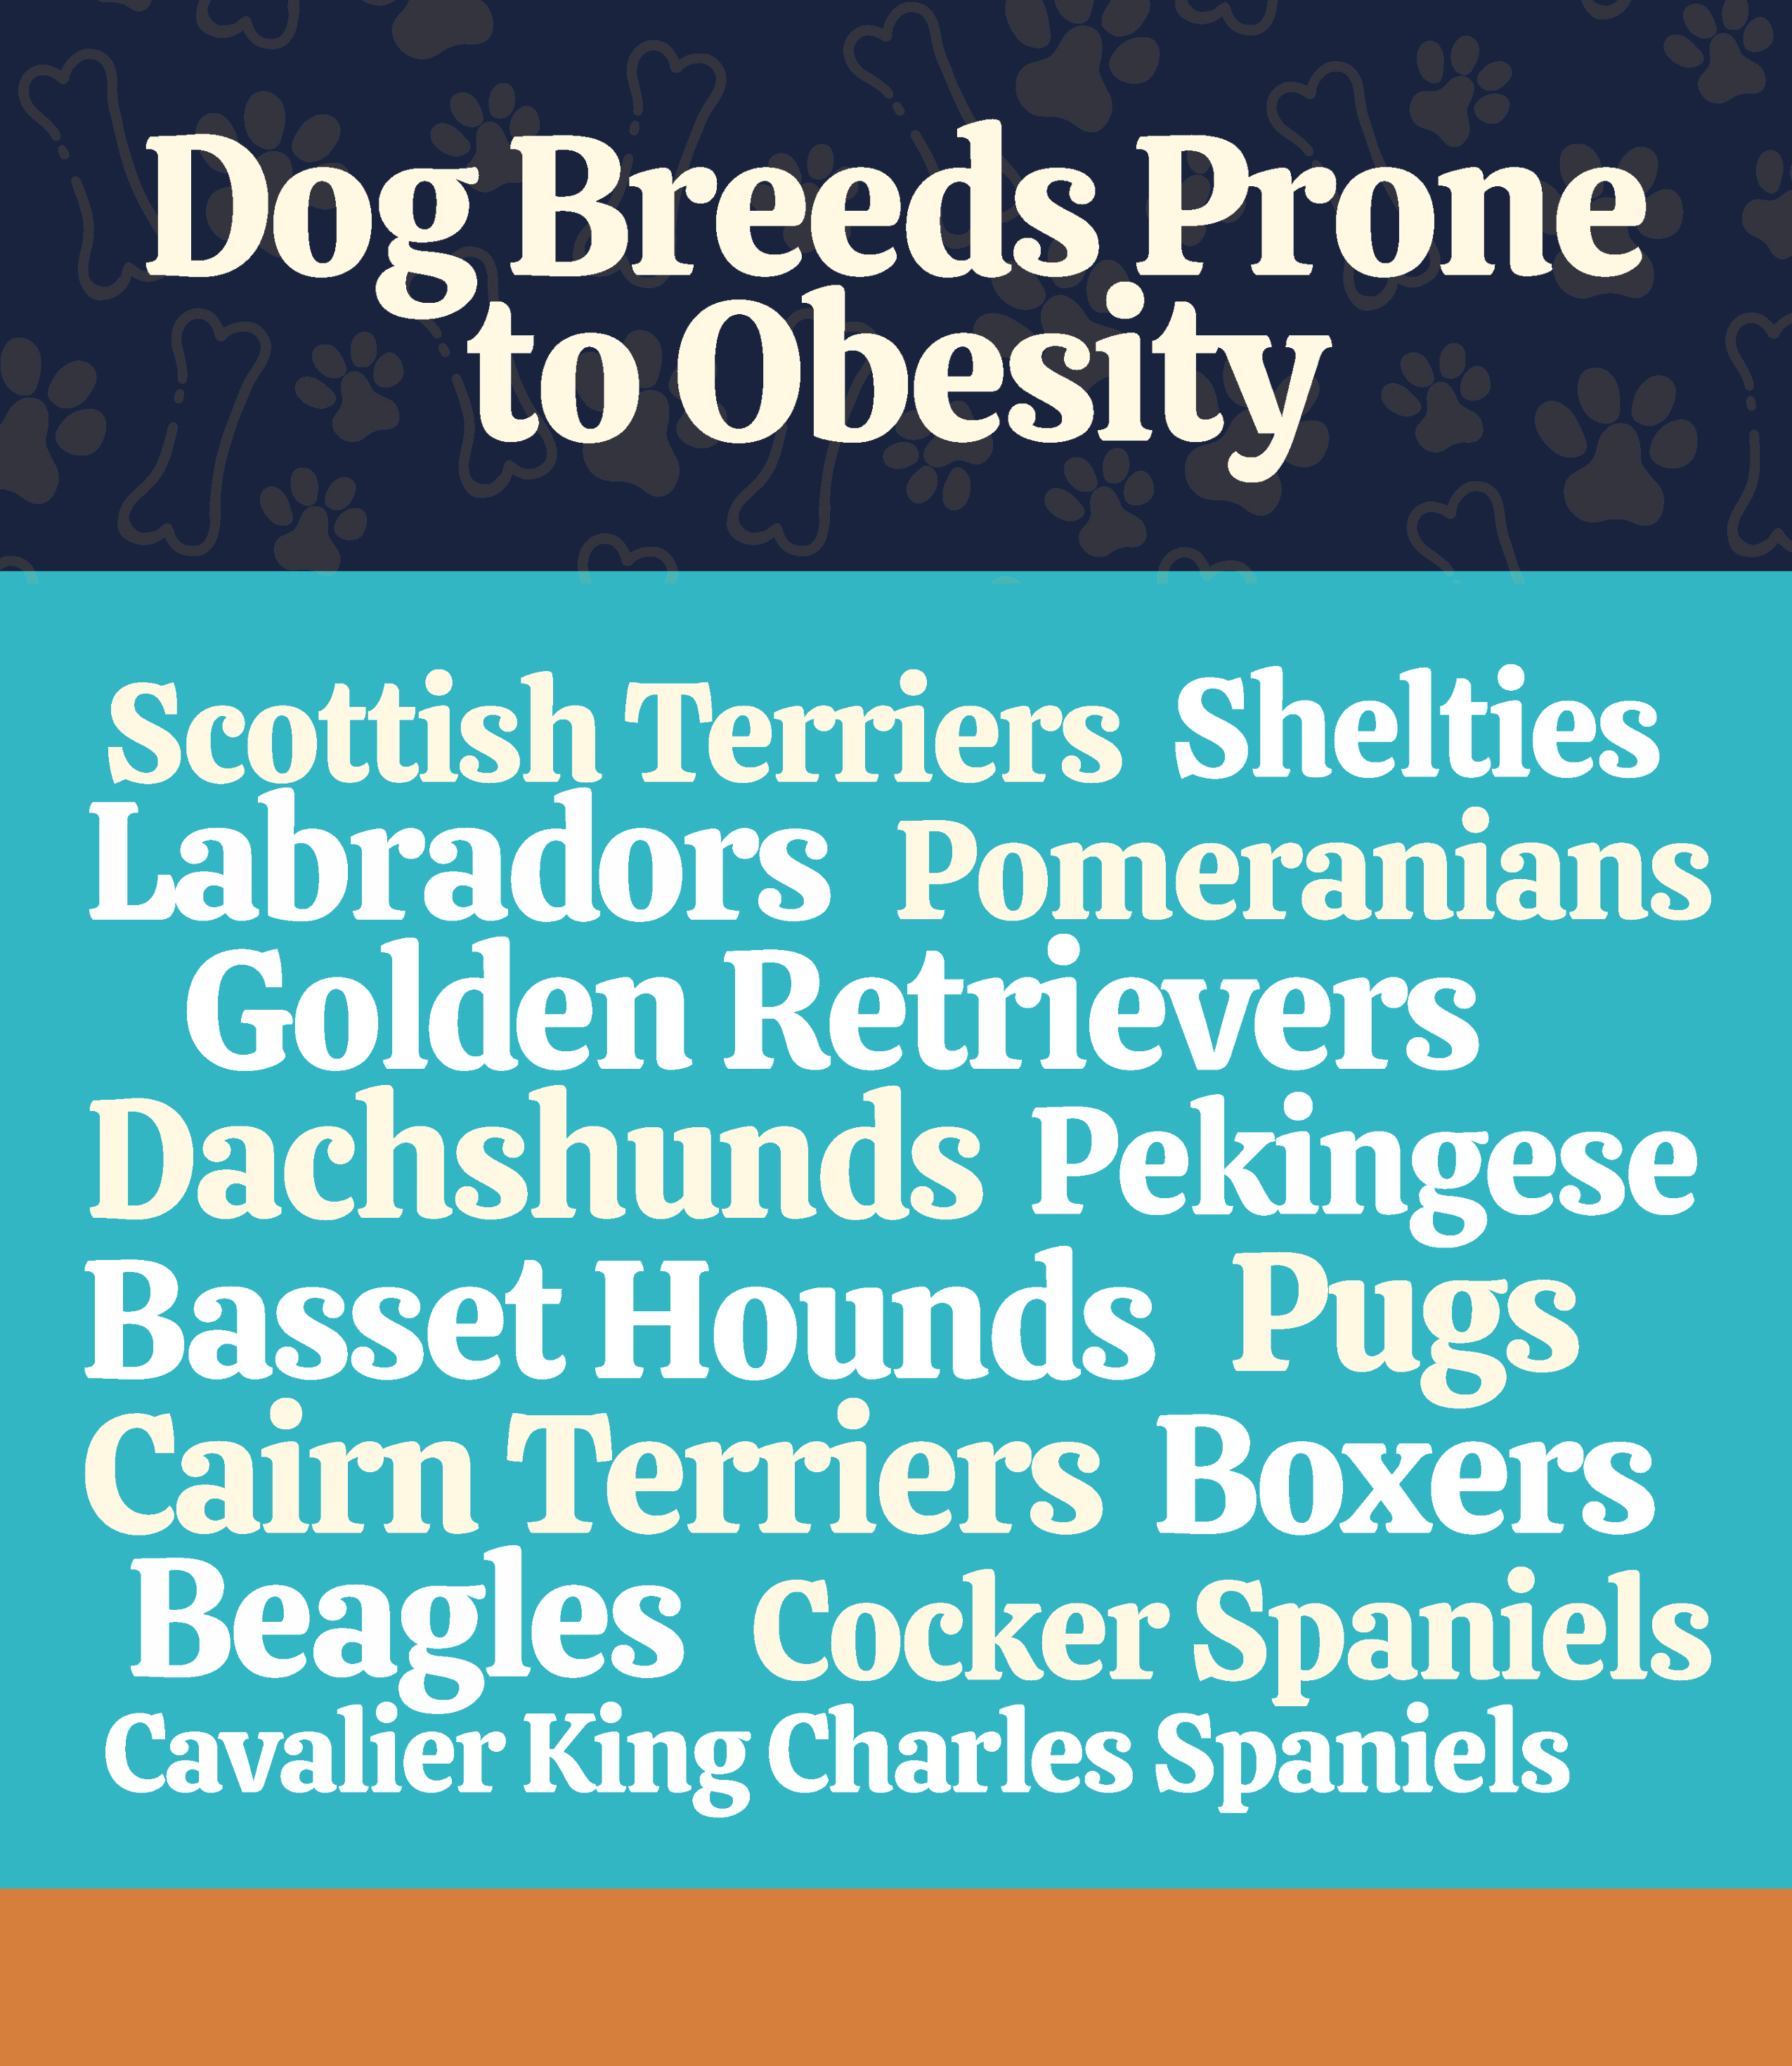 dogs-prone-to-obesity